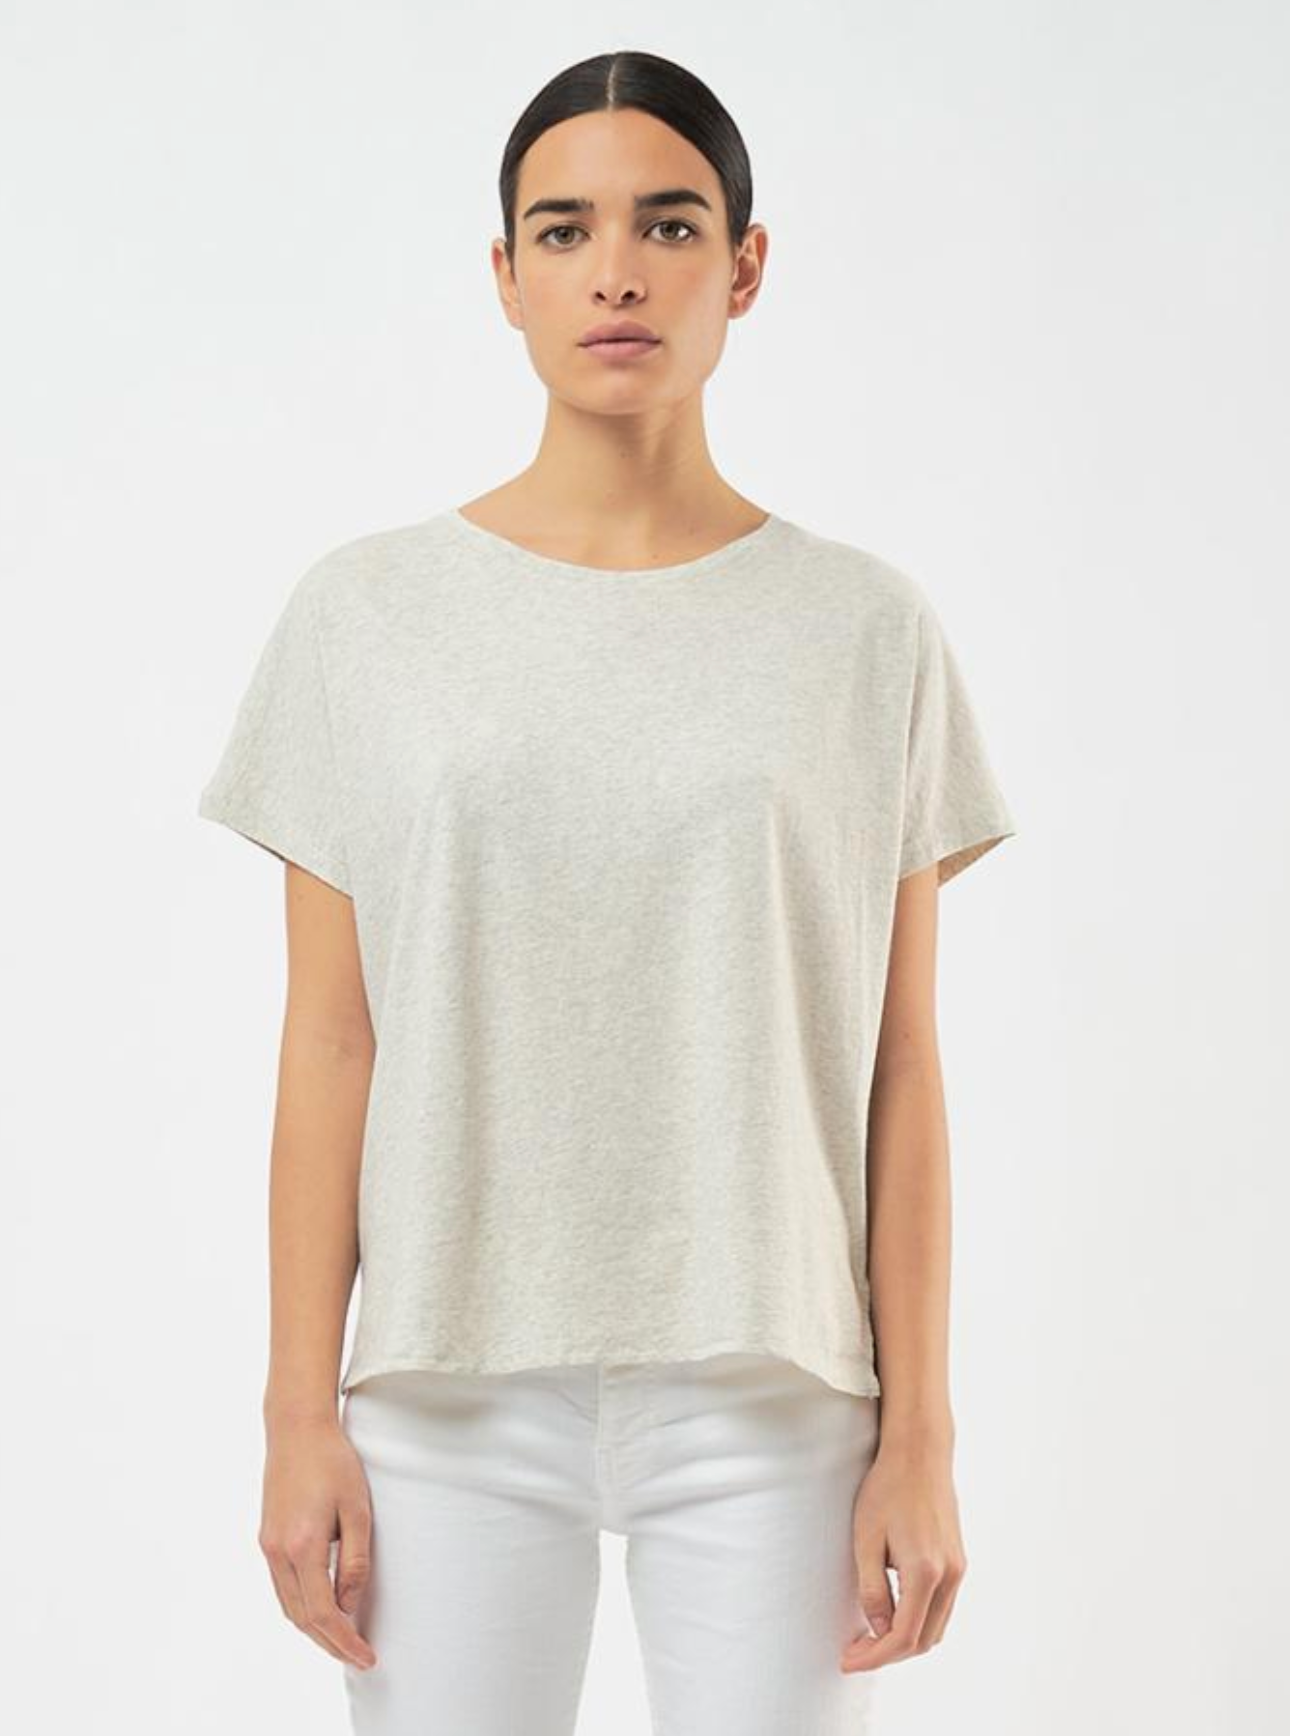 Cotton Silk Touch Short Sleeve T-Shirt - Brume Chine + Vintage Blue-Sea Biscuit Del Mar